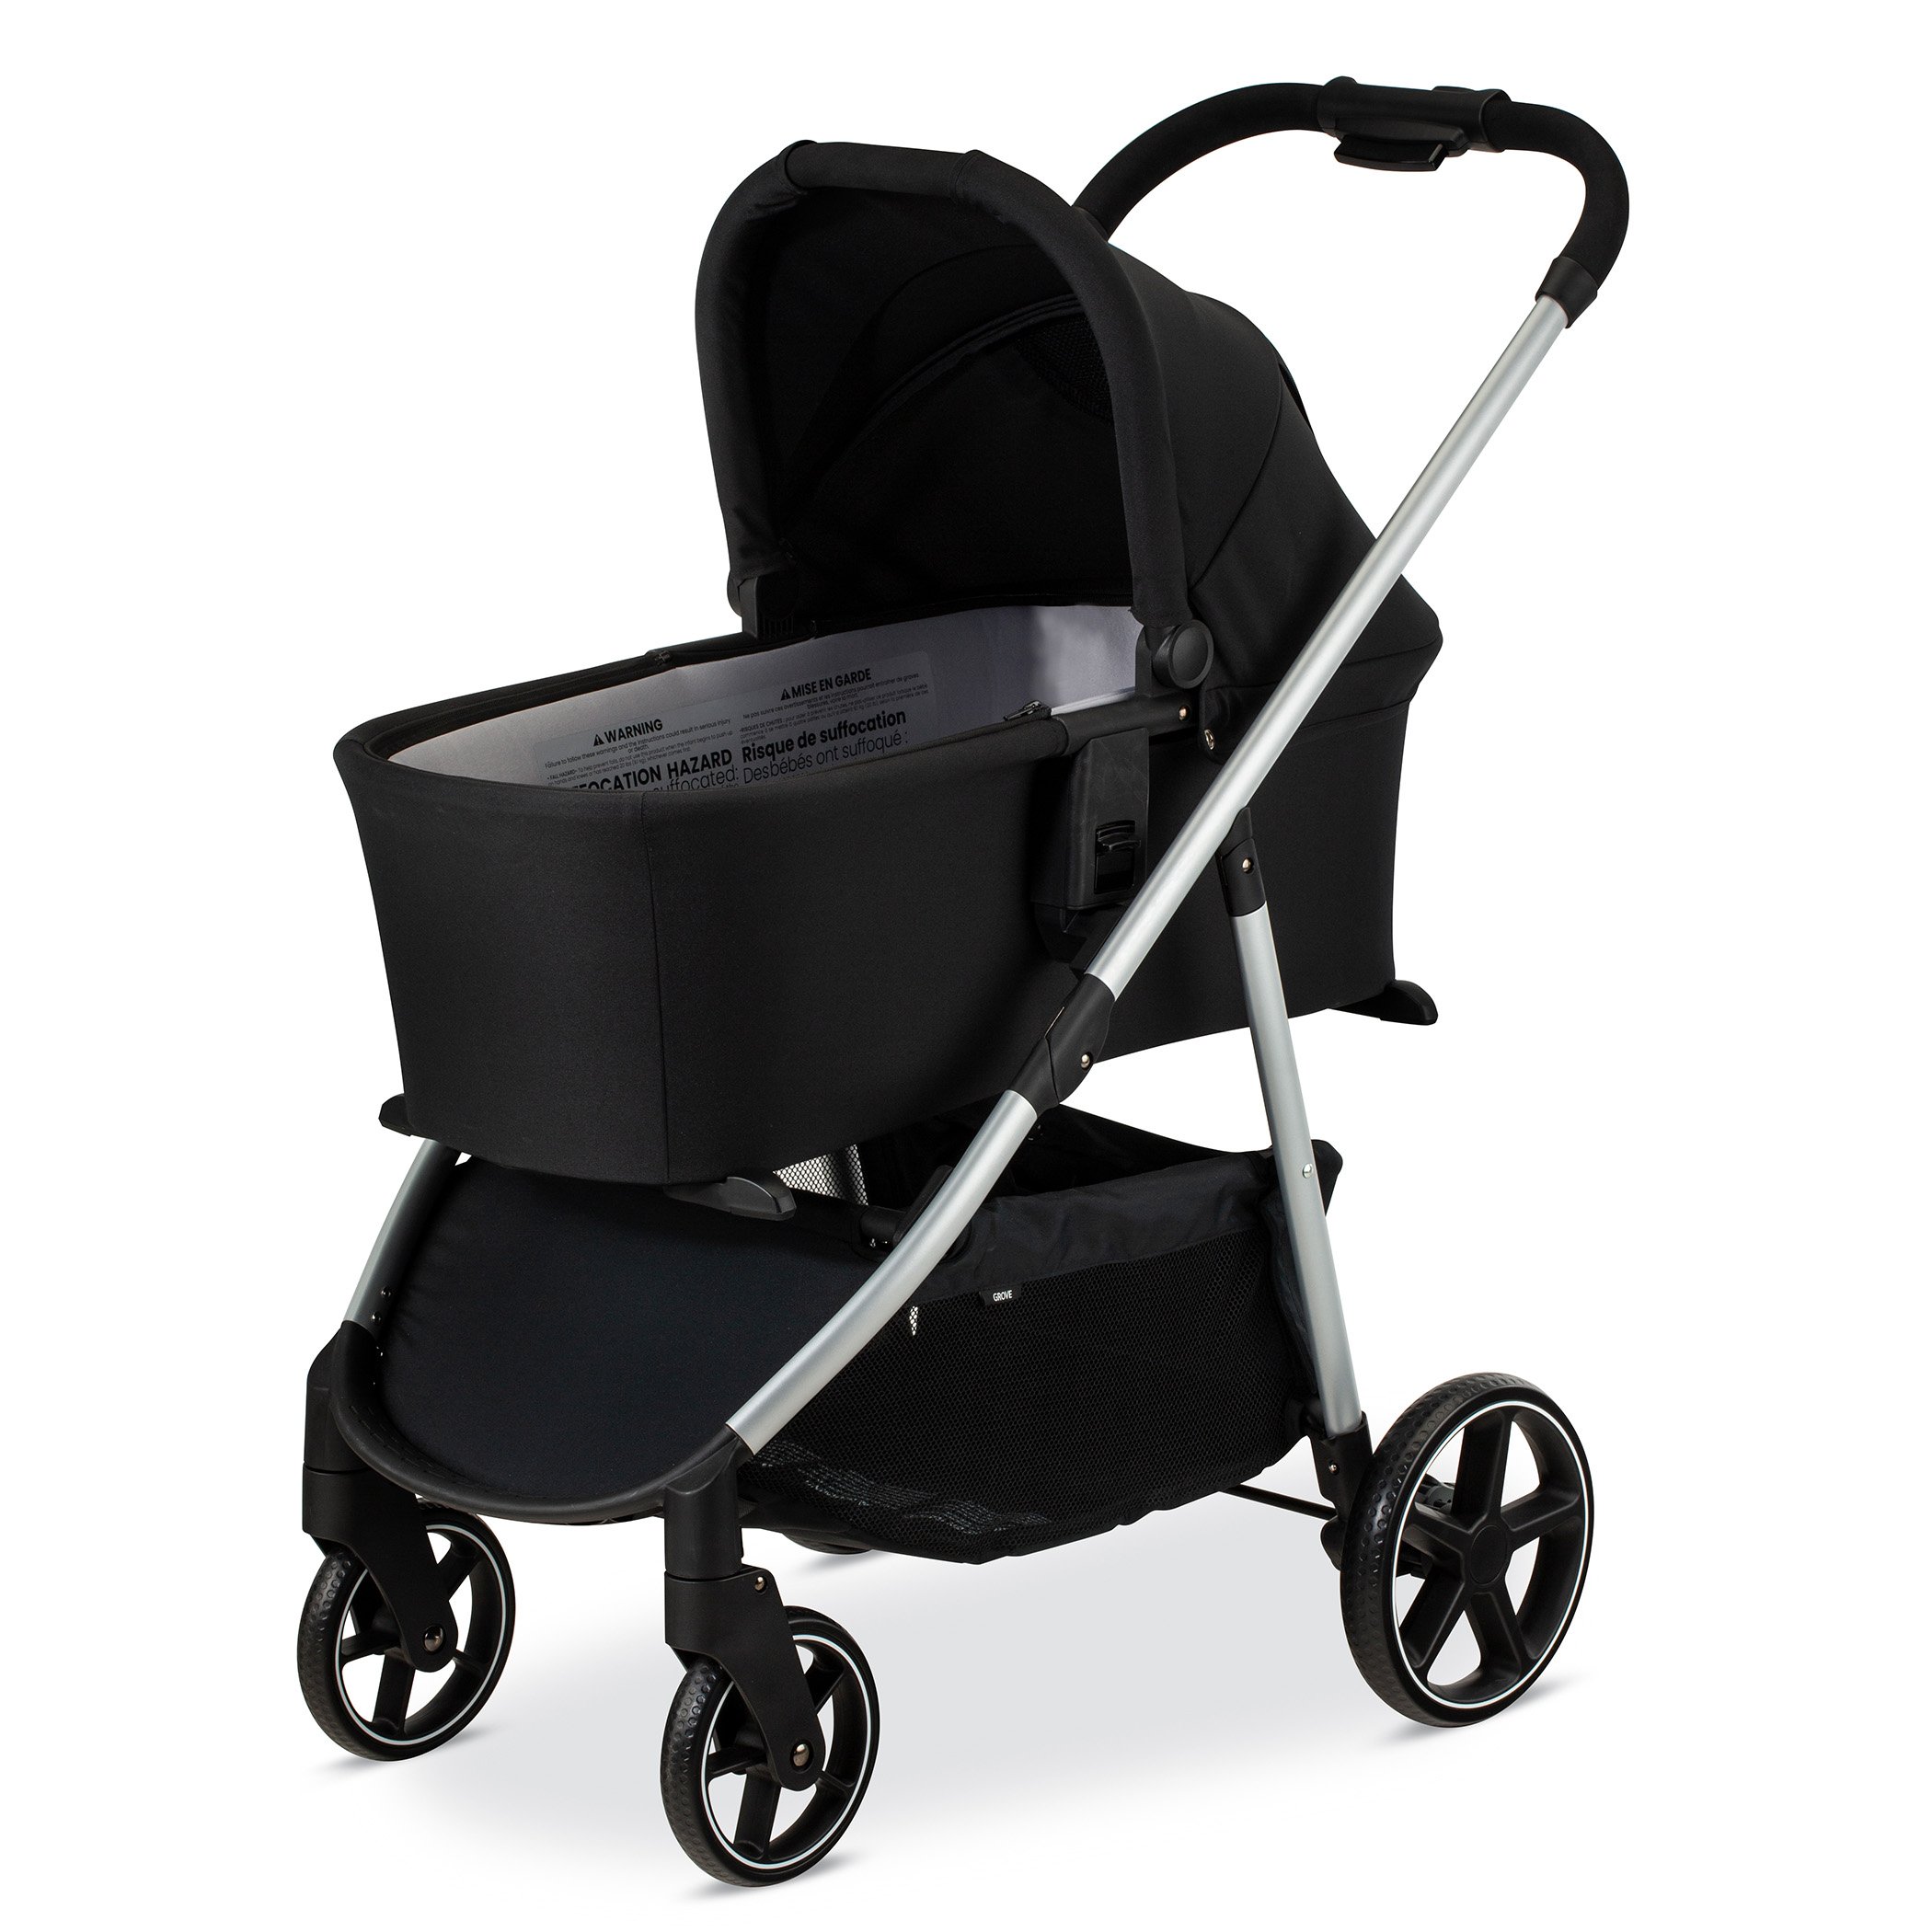 Grover Stroller with Bassinet open and attached